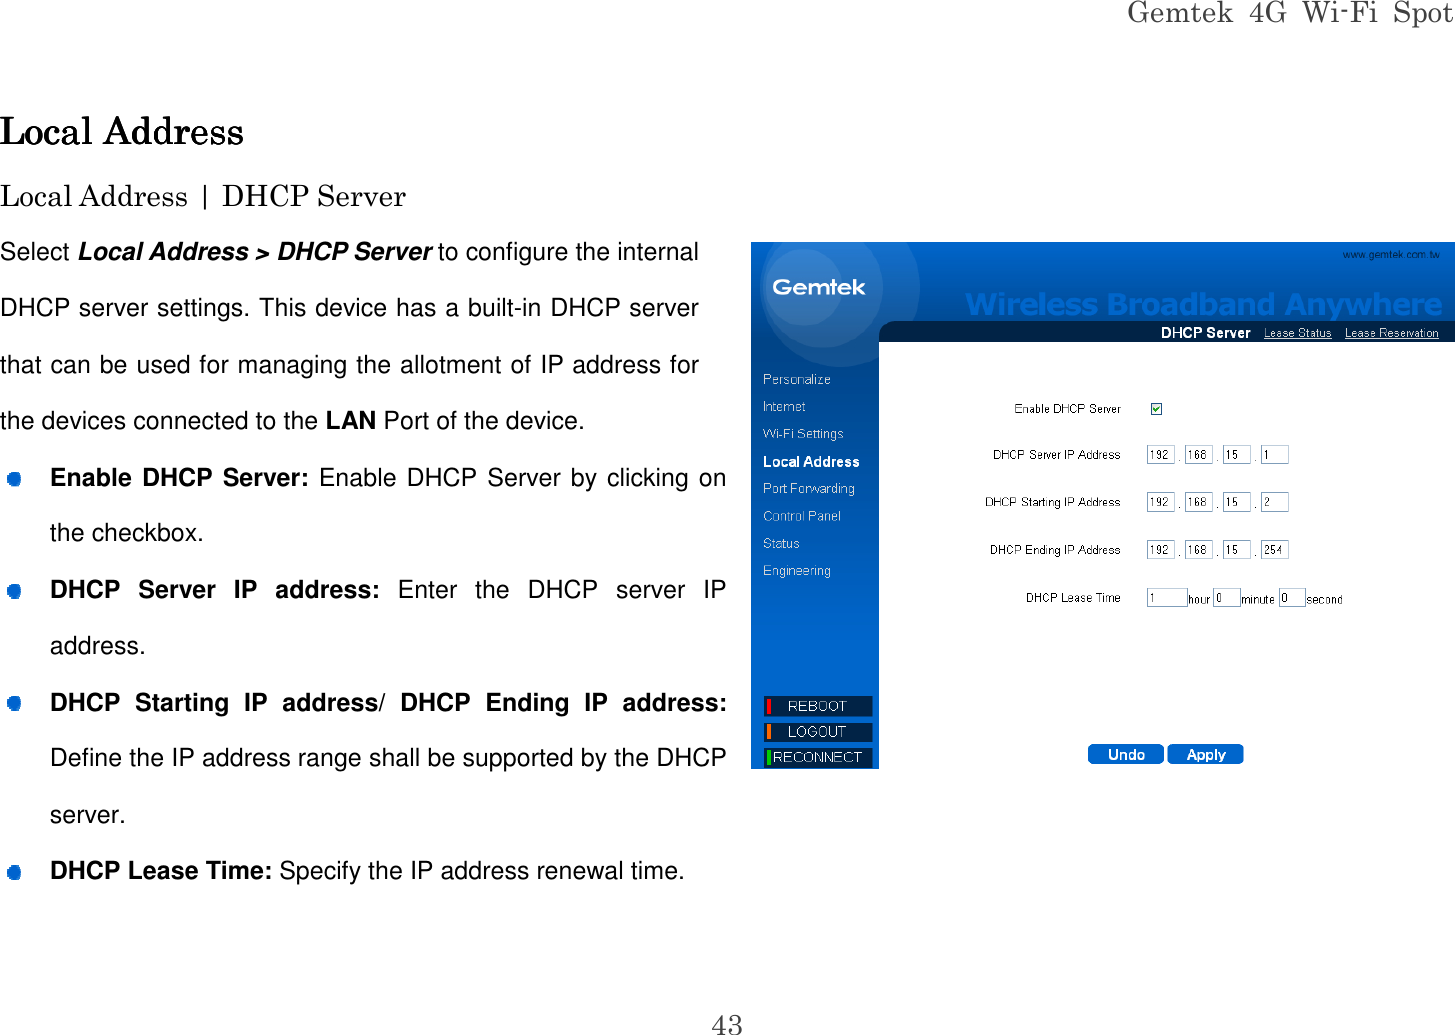 Gemtek  4G  Wi-Fi  Spot 43 Local AddressLocal AddressLocal AddressLocal Address    Local Address | DHCP Server Select Local Address &gt; DHCP Server to configure the internal DHCP server settings. This device has a built-in DHCP server that can be used for managing the allotment of IP address for the devices connected to the LAN Port of the device.  Enable DHCP Server: Enable DHCP Server by clicking on the checkbox.  DHCP  Server  IP  address:  Enter  the  DHCP  server  IP address.  DHCP  Starting  IP  address/  DHCP  Ending  IP  address: Define the IP address range shall be supported by the DHCP server.  DHCP Lease Time: Specify the IP address renewal time.   